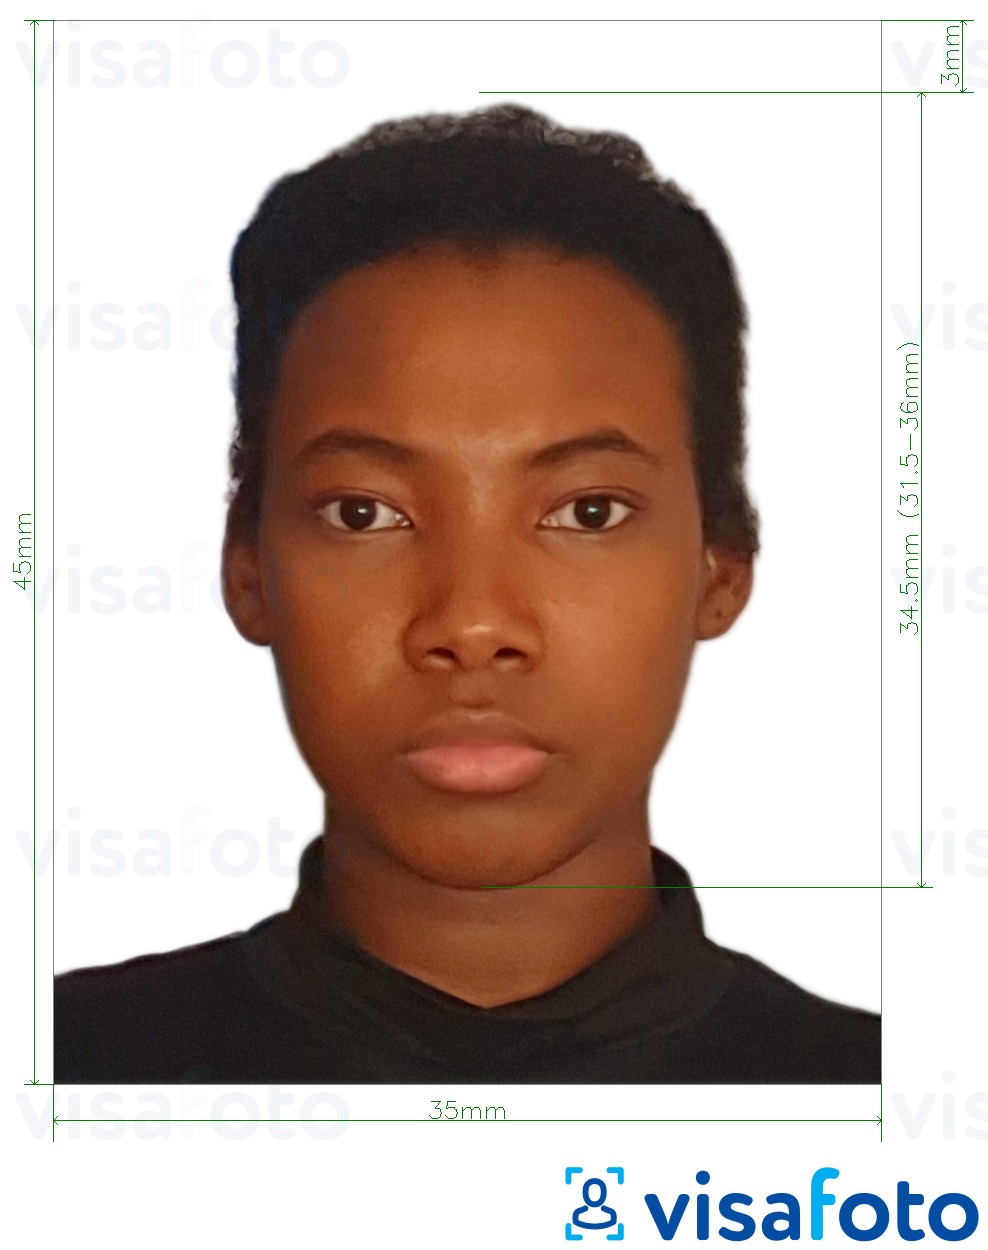 Example of photo for Equatorial Guinea visa 35x45 mm (3.5x4.5 cm) with exact size specification